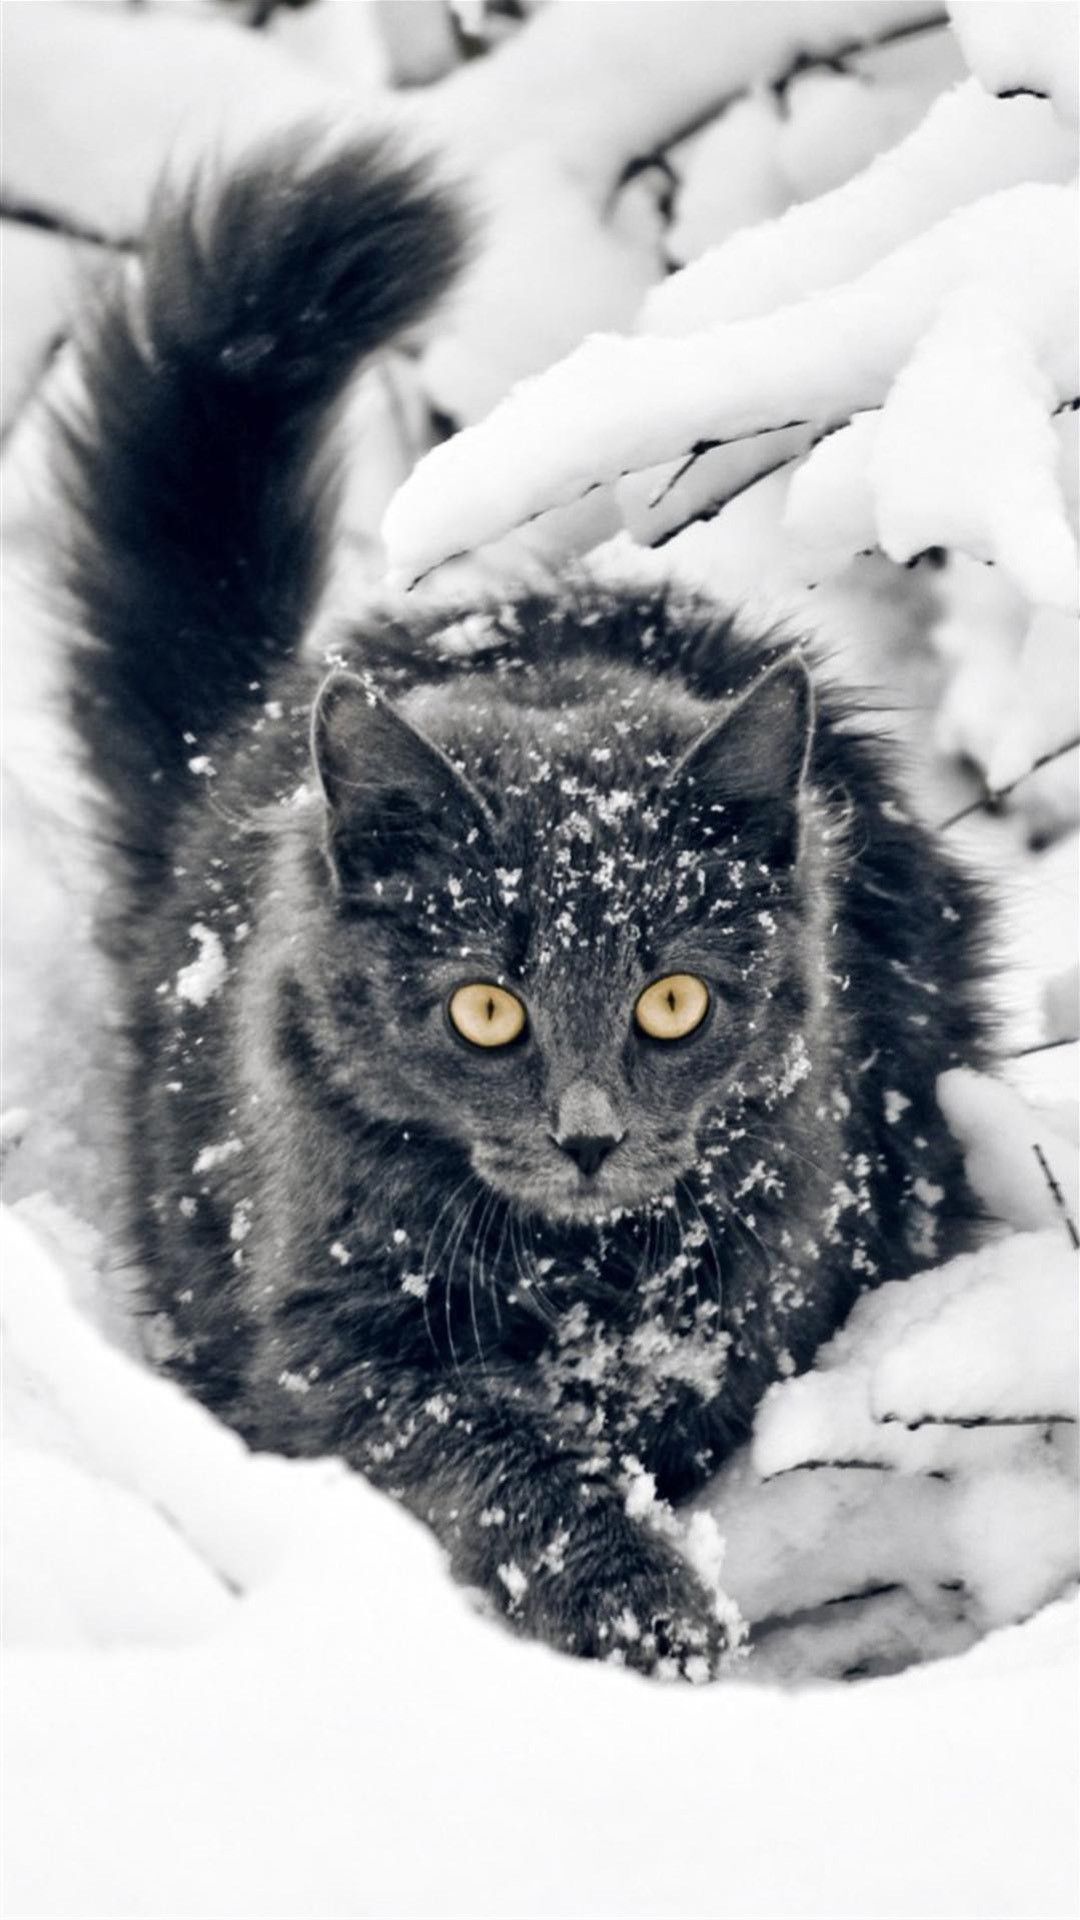 A black cat is sitting in the snow - Cat